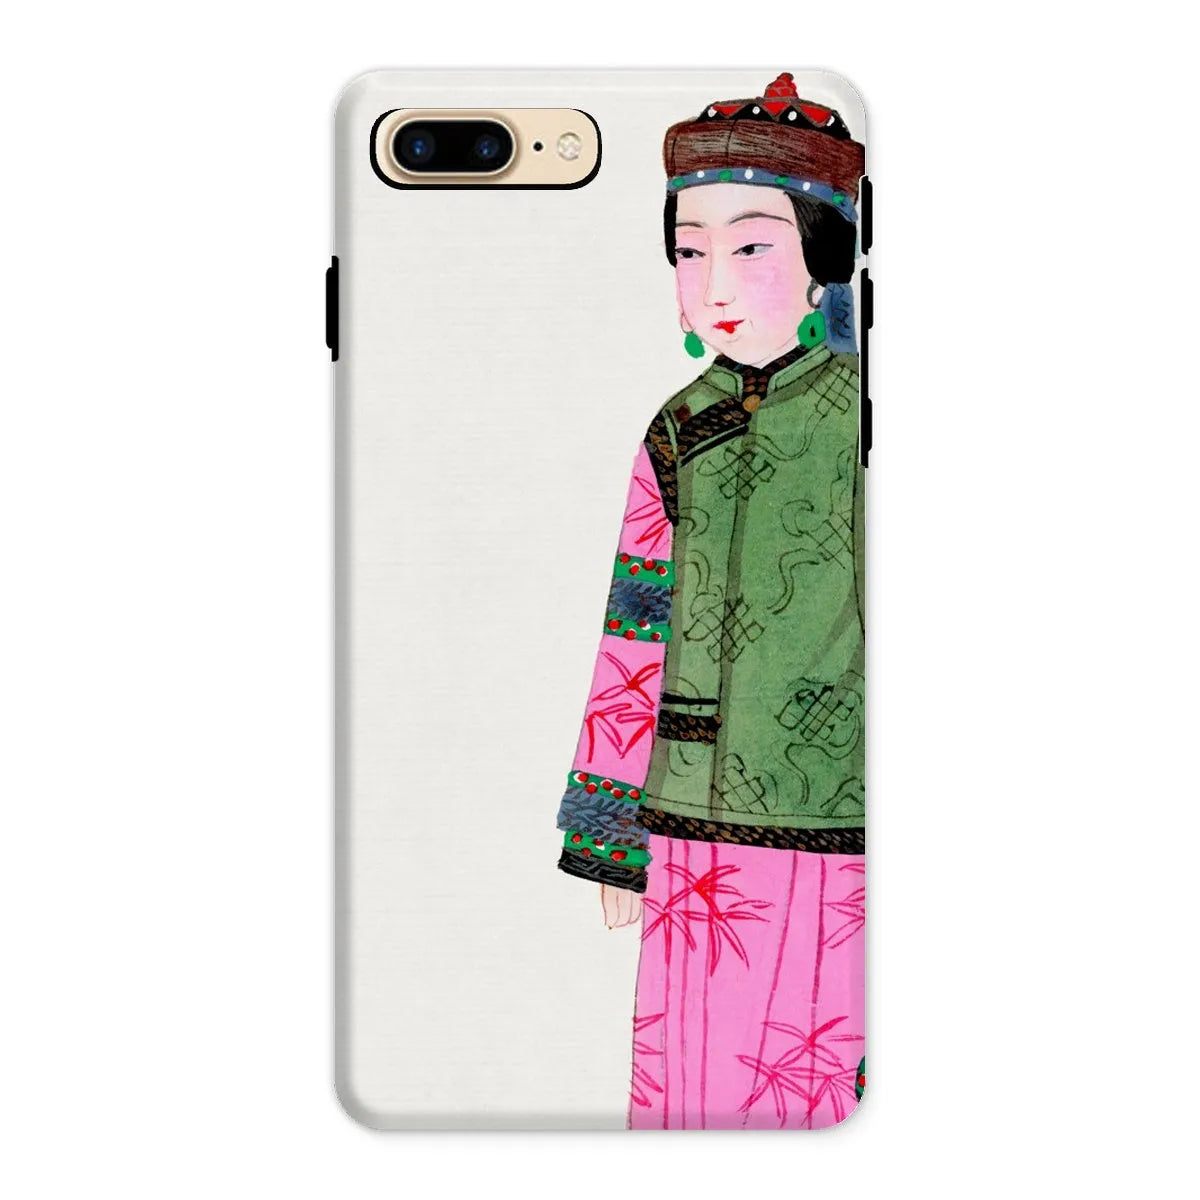 Noblewoman In Winter - Chinese Aesthetic Art Phone Case - Iphone 8 Plus / Matte - Mobile Phone Cases - Aesthetic Art